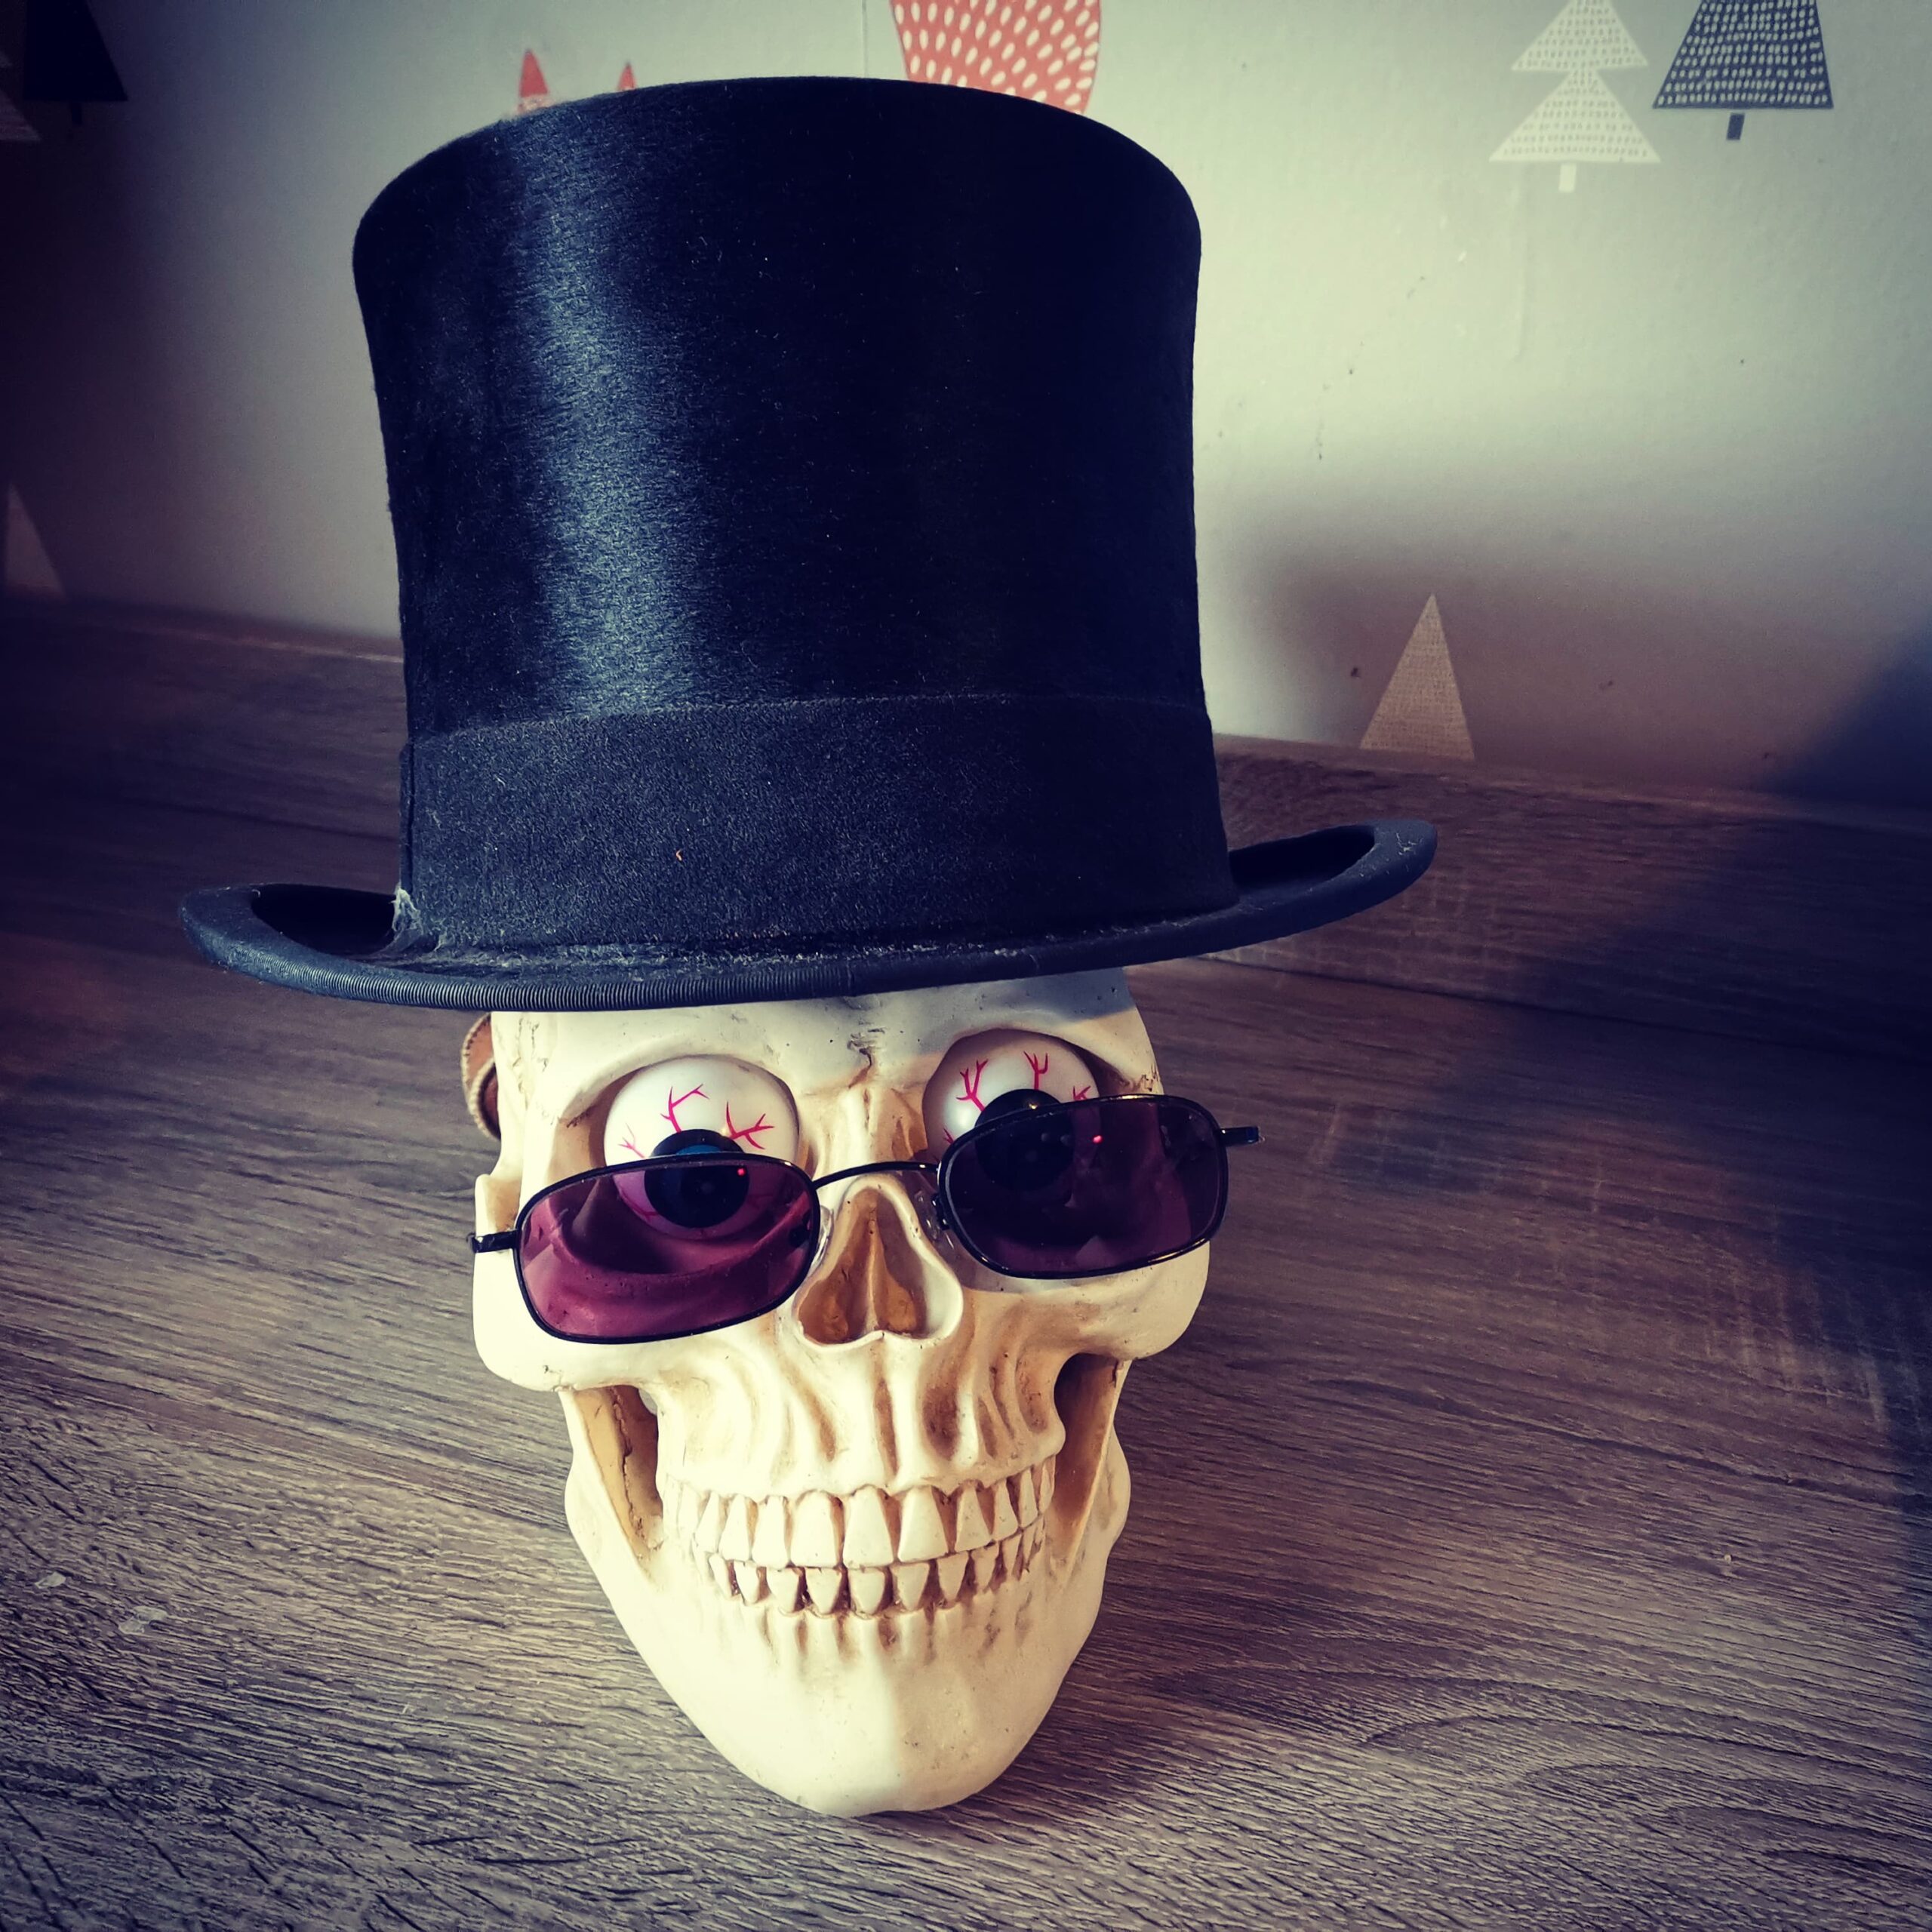 Image of a model human skull with plastic eyeballs (aka Erik), wearing a top hat and a pair of red-tinted sunglasses.